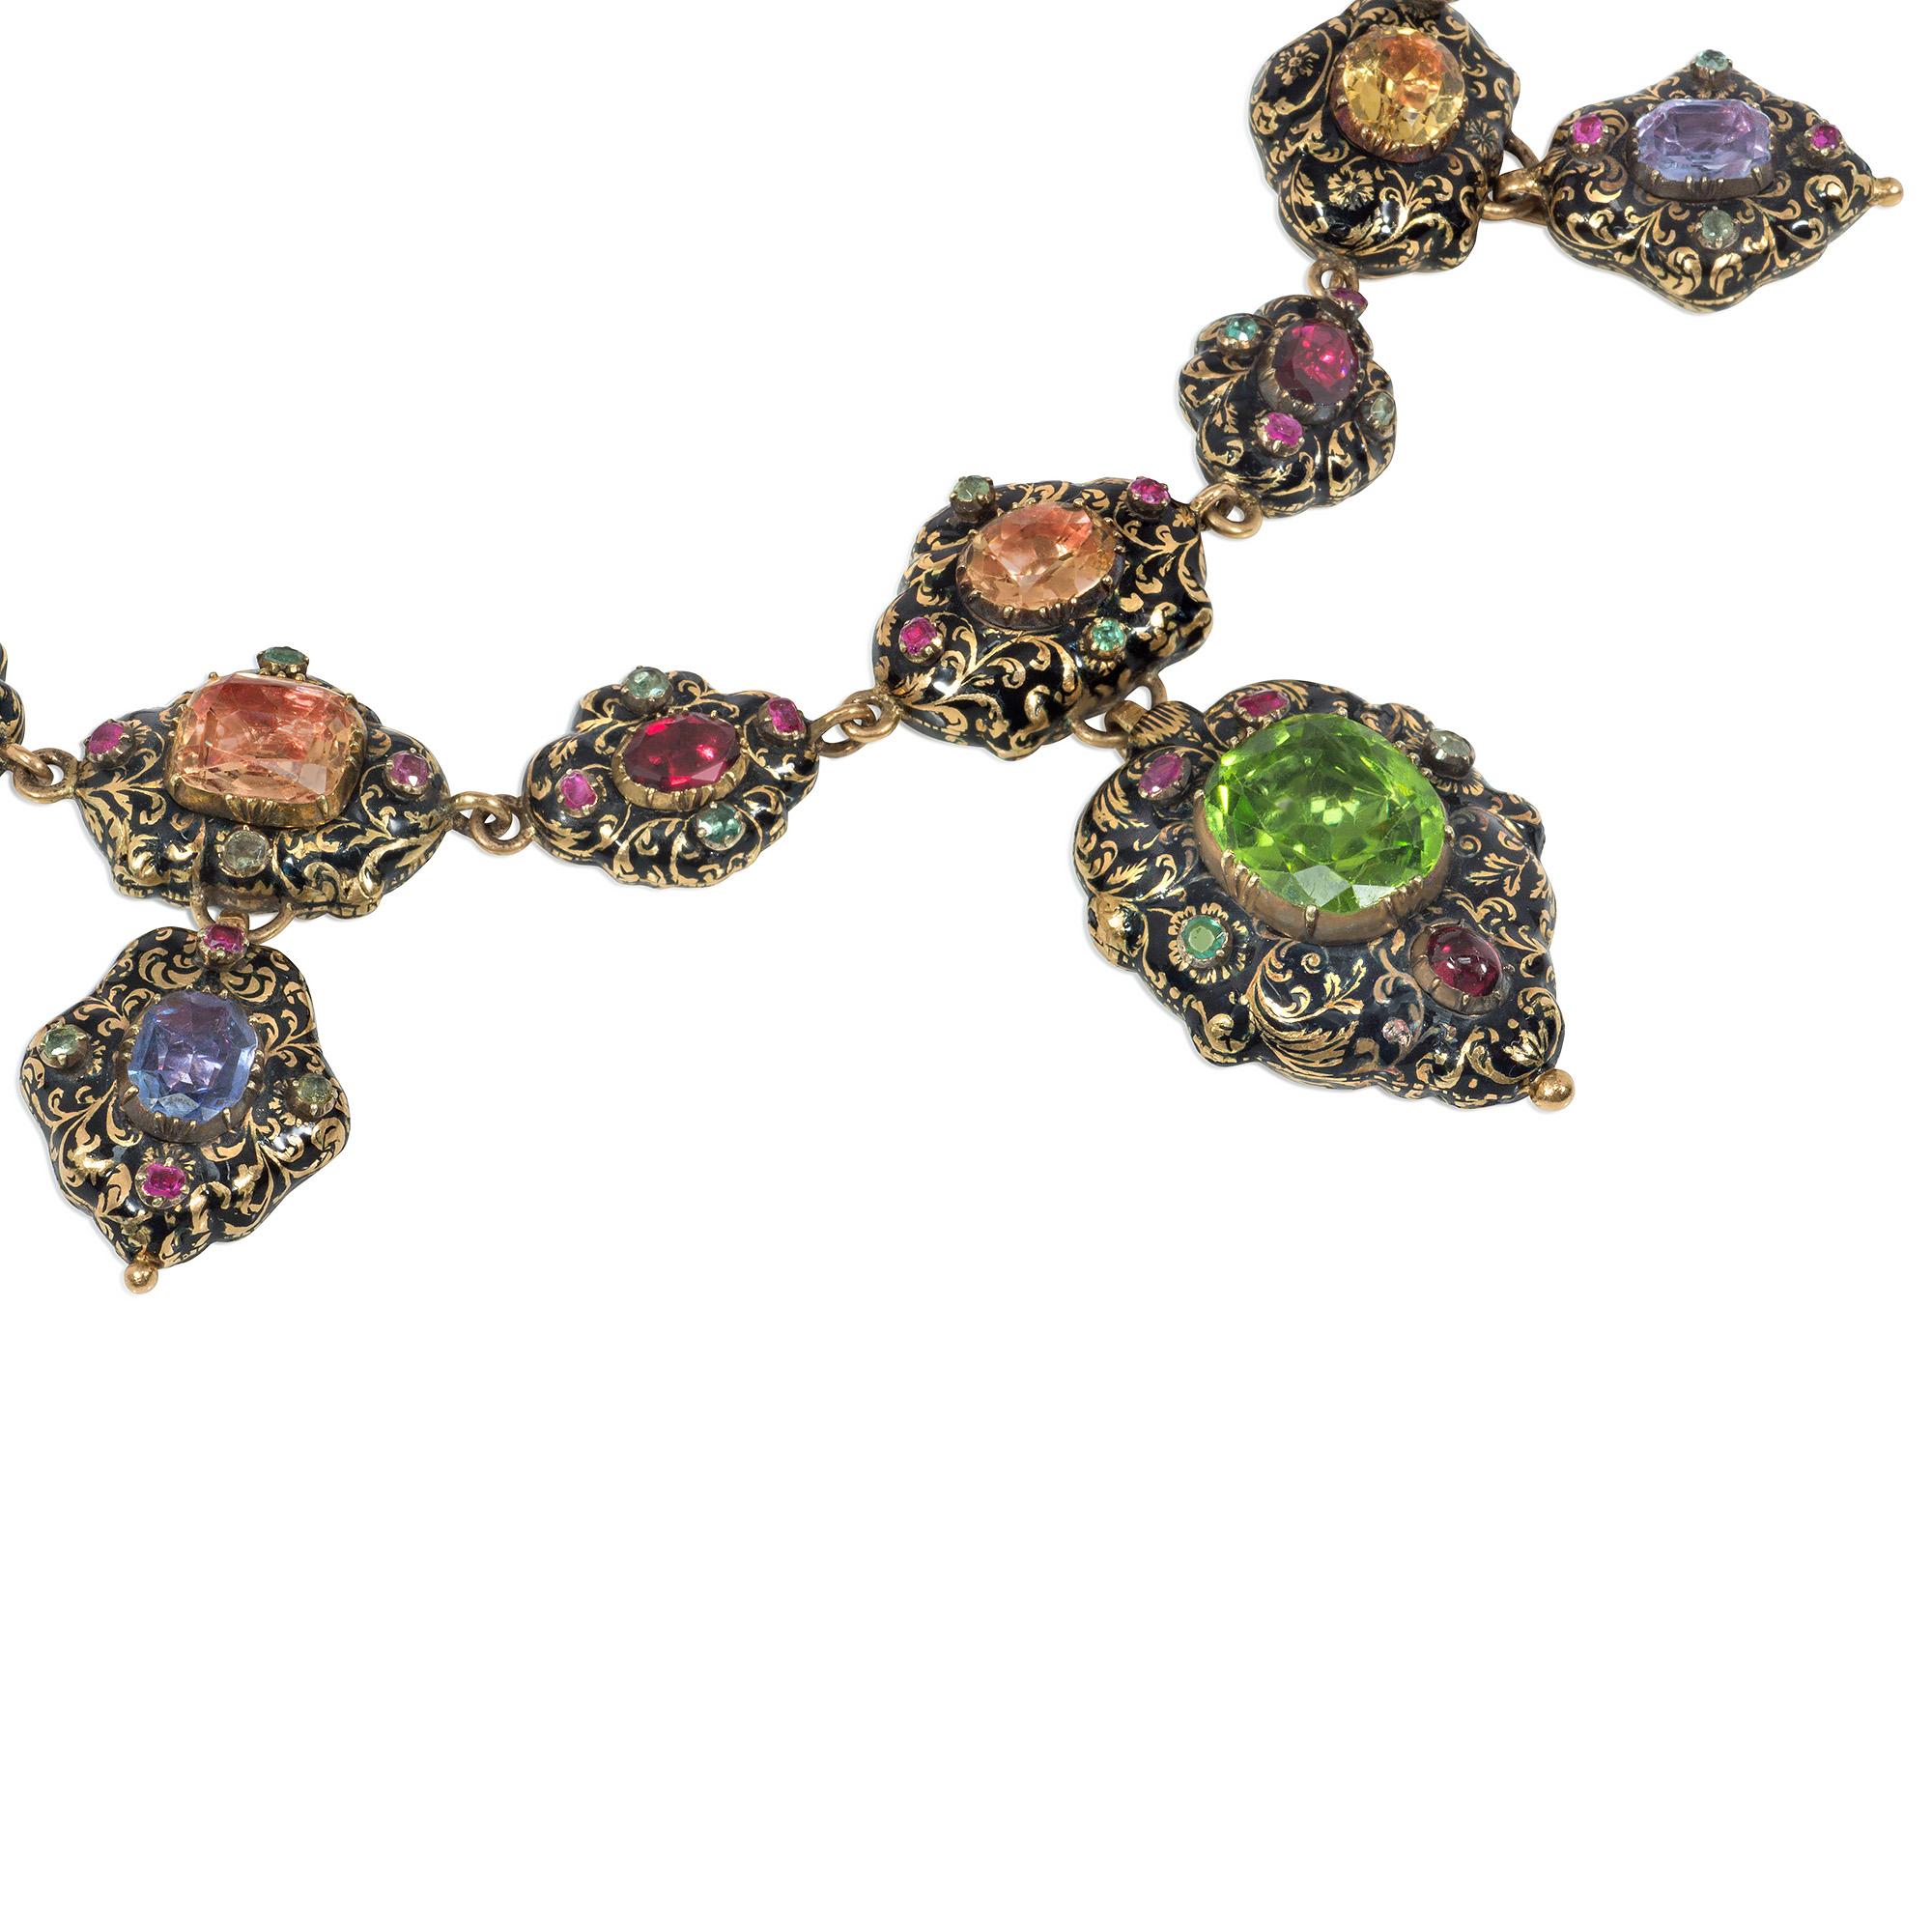 Georgian Important Antique Early-19th Century Swiss Enamel, Gold, and Multi-Gem Necklace For Sale